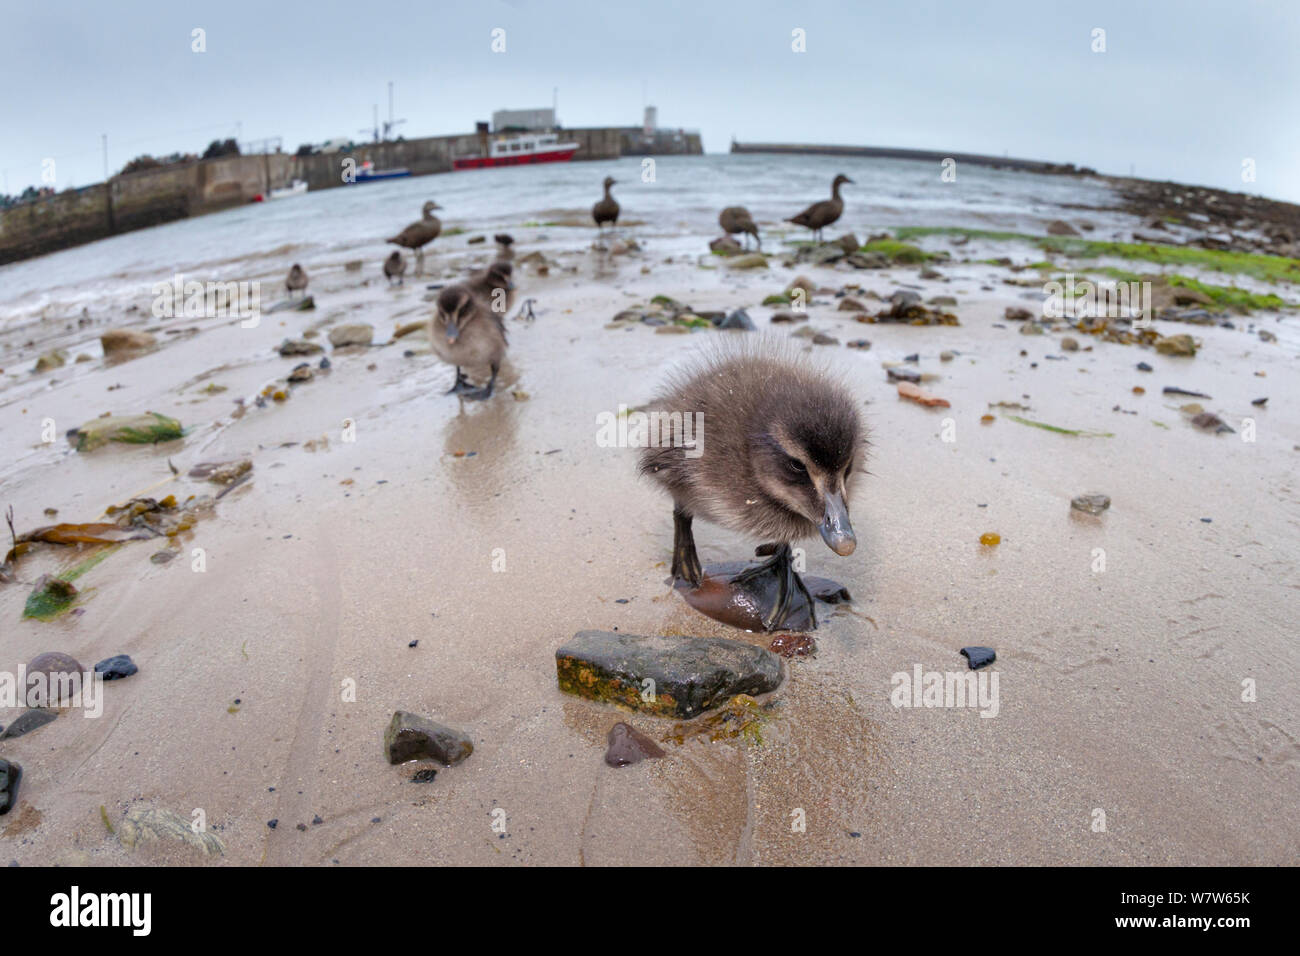 Eider duckling (Somateria mollissima) on beach, Northumberland, UK. May. Taken with wide angle lens. Stock Photo